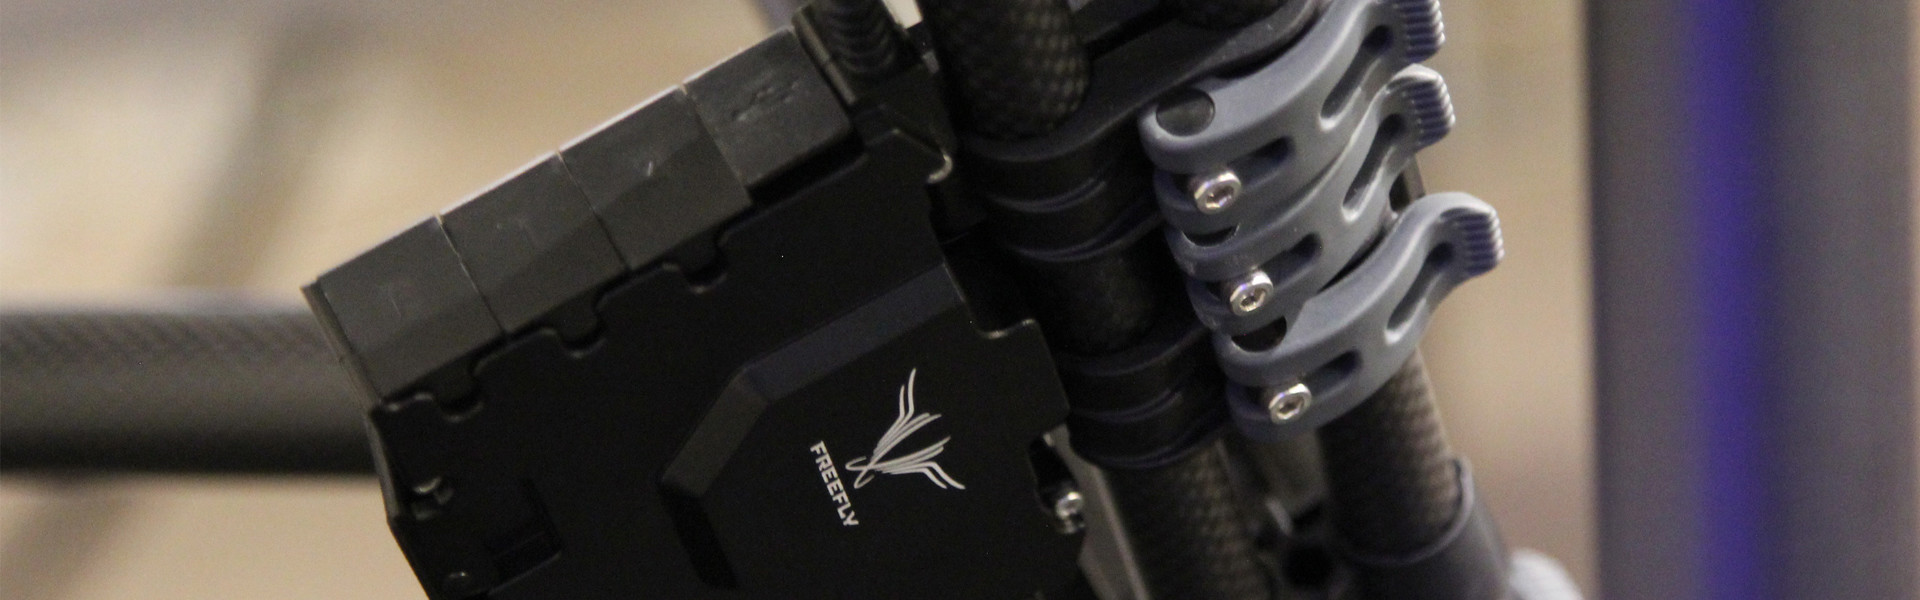 Header image for article Freefly Systems ALTA 8 Now Available from AbelCine